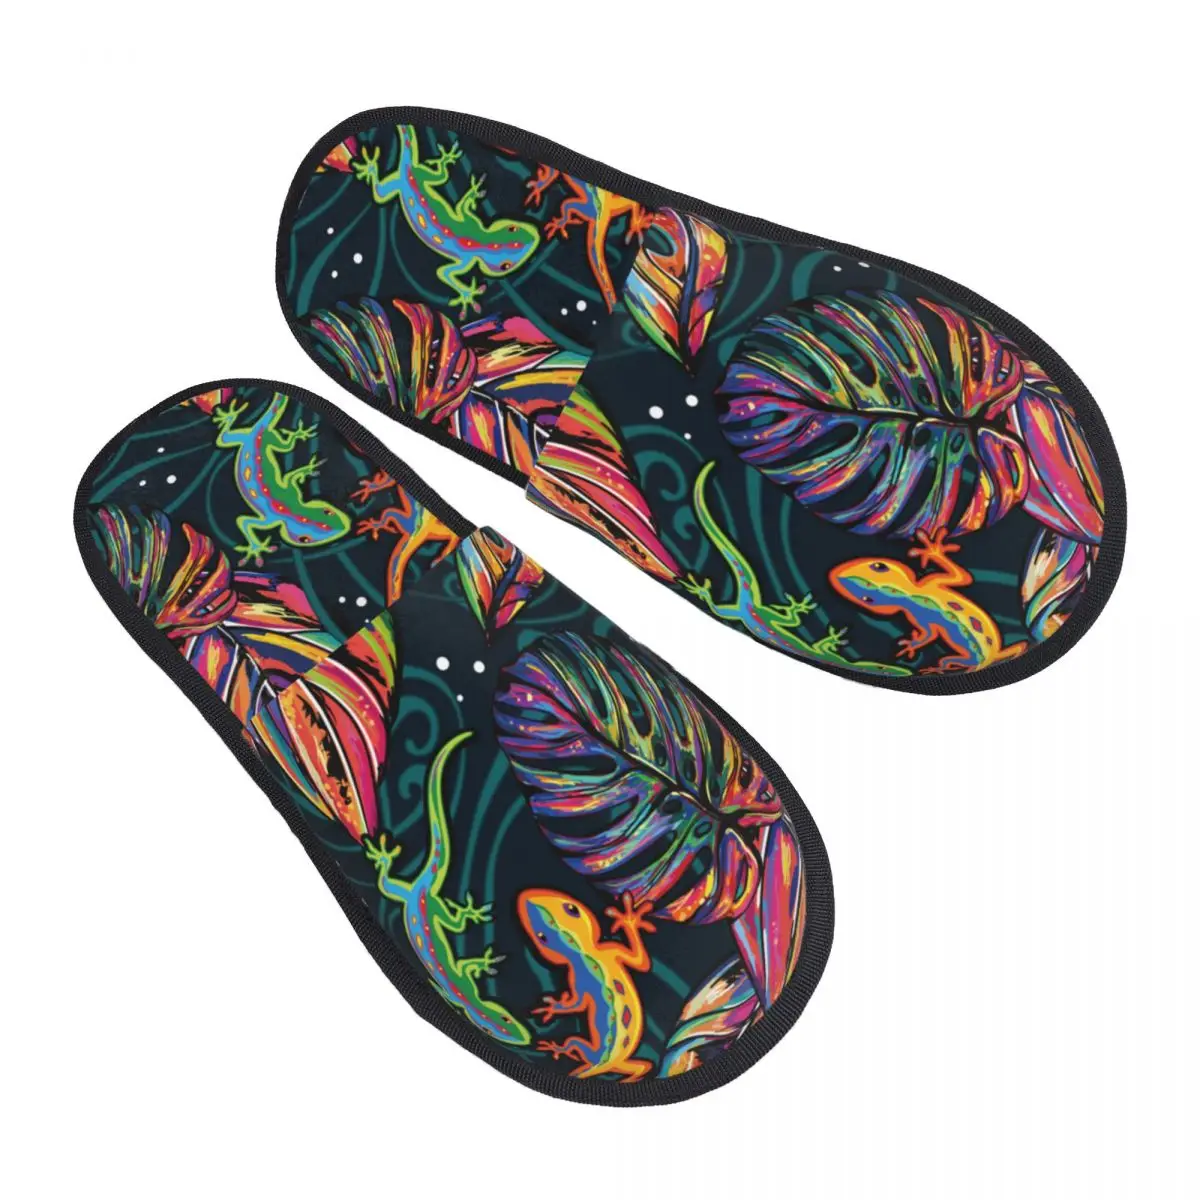 Tropical Lizards And Amulticolor Leaves Slipper For Women Men Fluffy Winter Warm Slippers Indoor Slippers